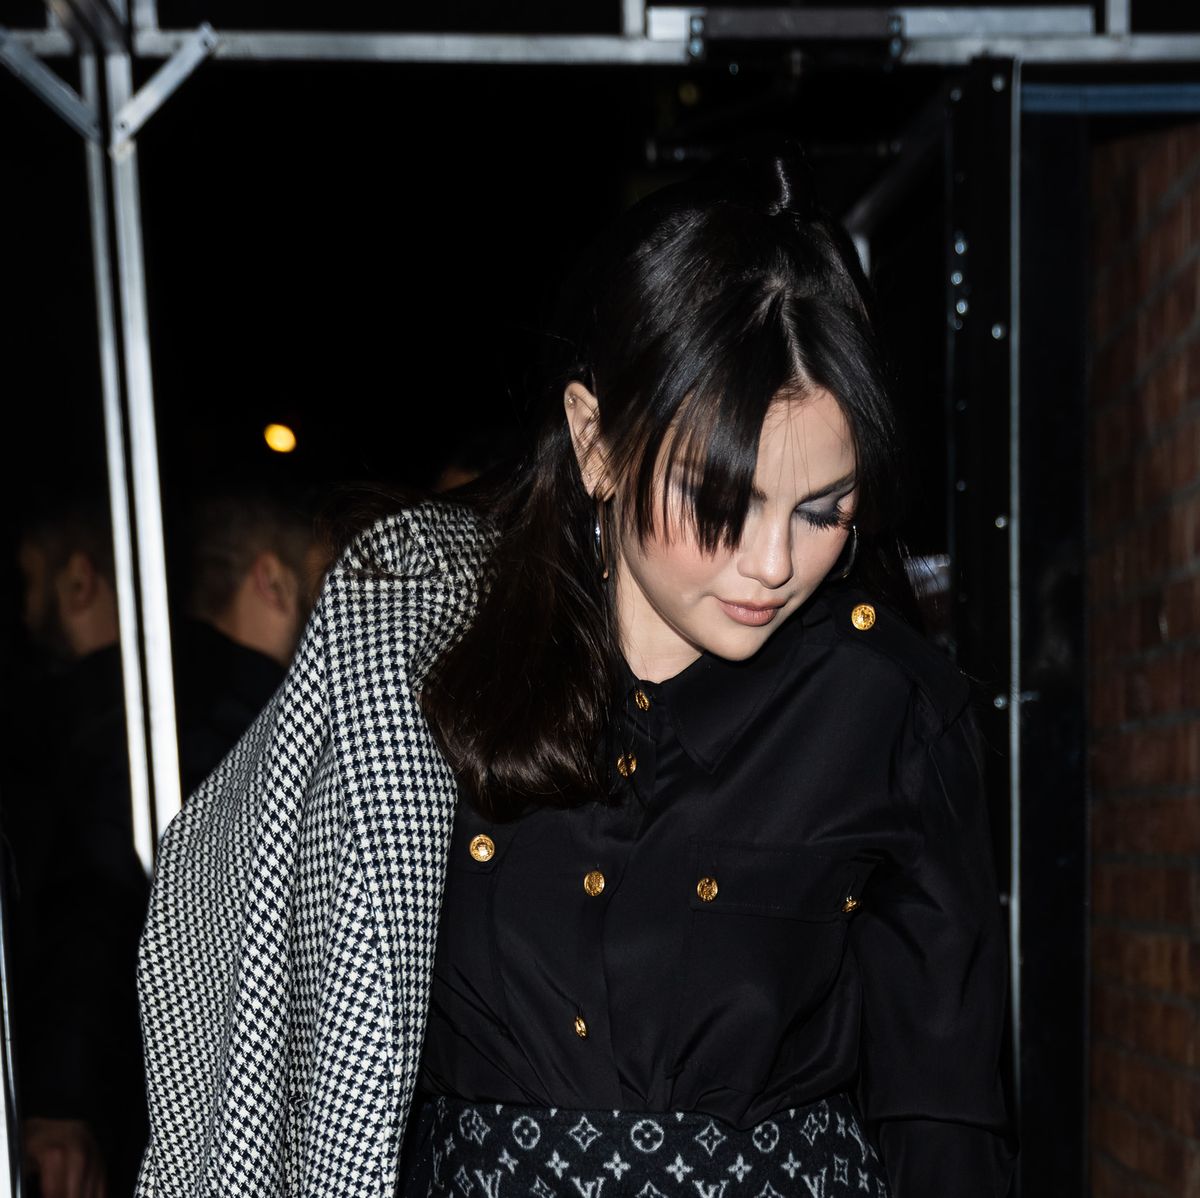 Louis Vuitton's newest It bag was just spotted on Selena Gomez